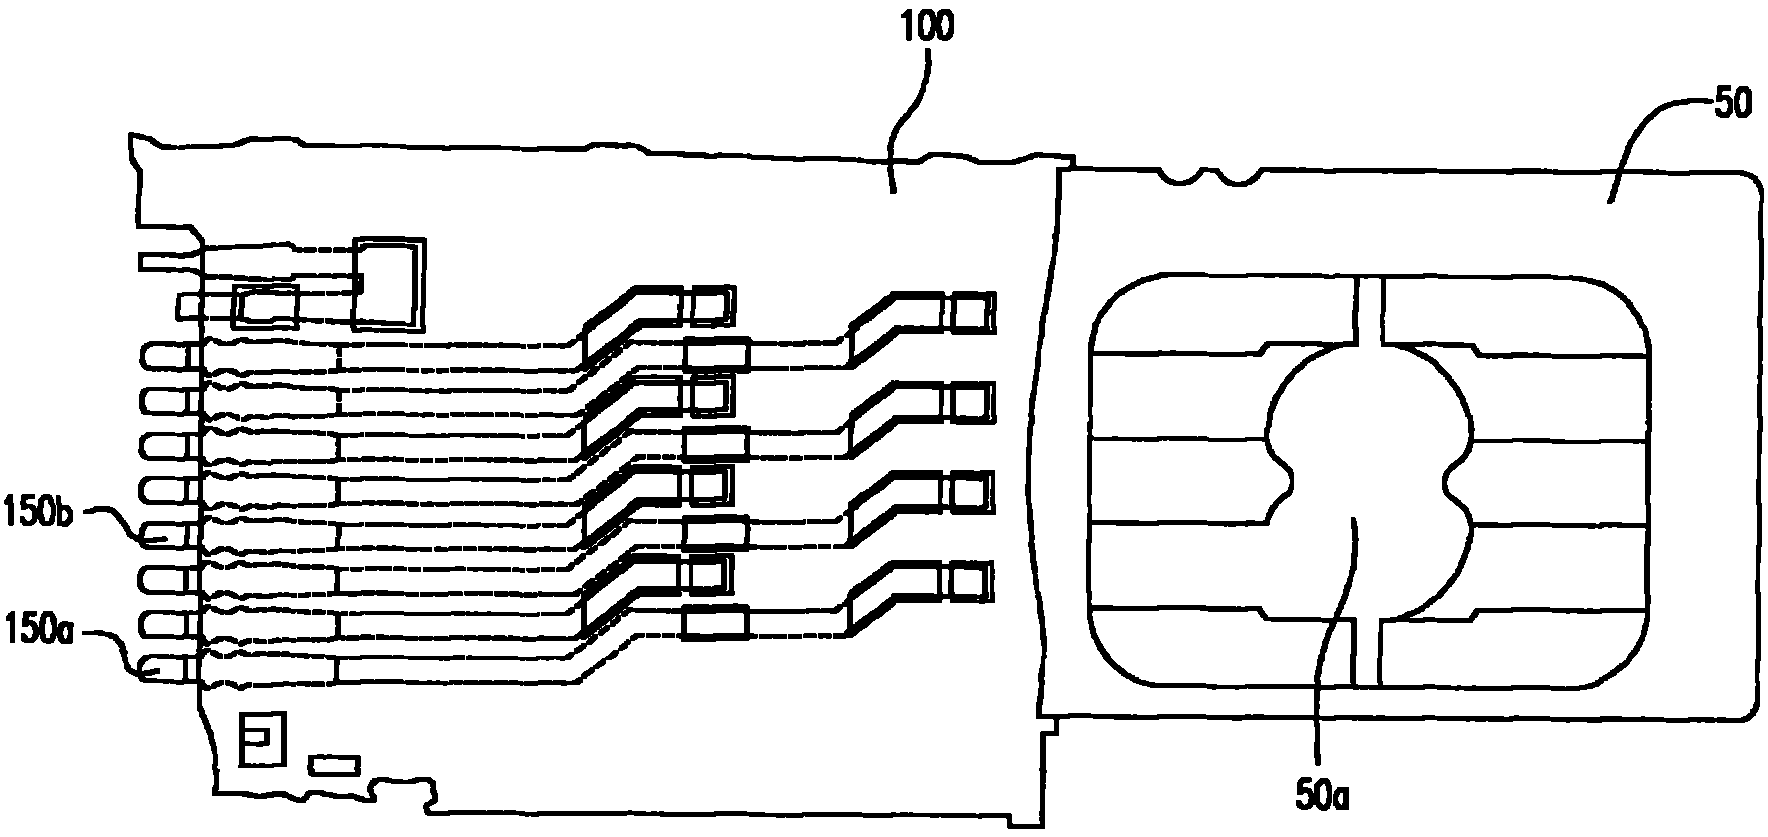 Chip card connector